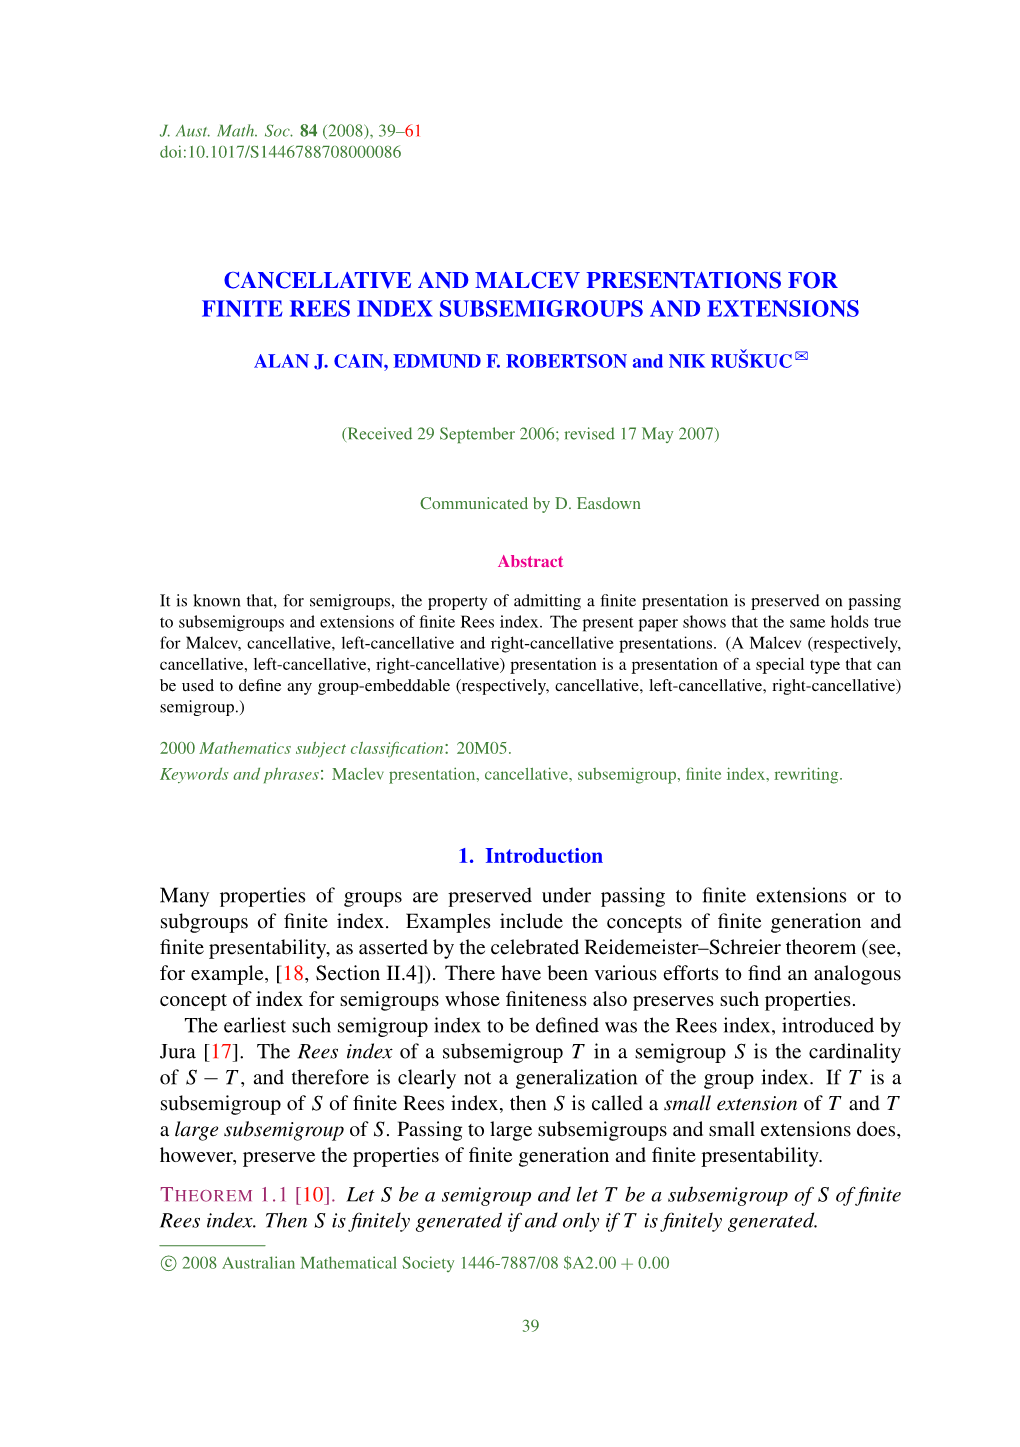 Cancellative and Malcev Presentations for Finite Rees Index Subsemigroups and Extensions